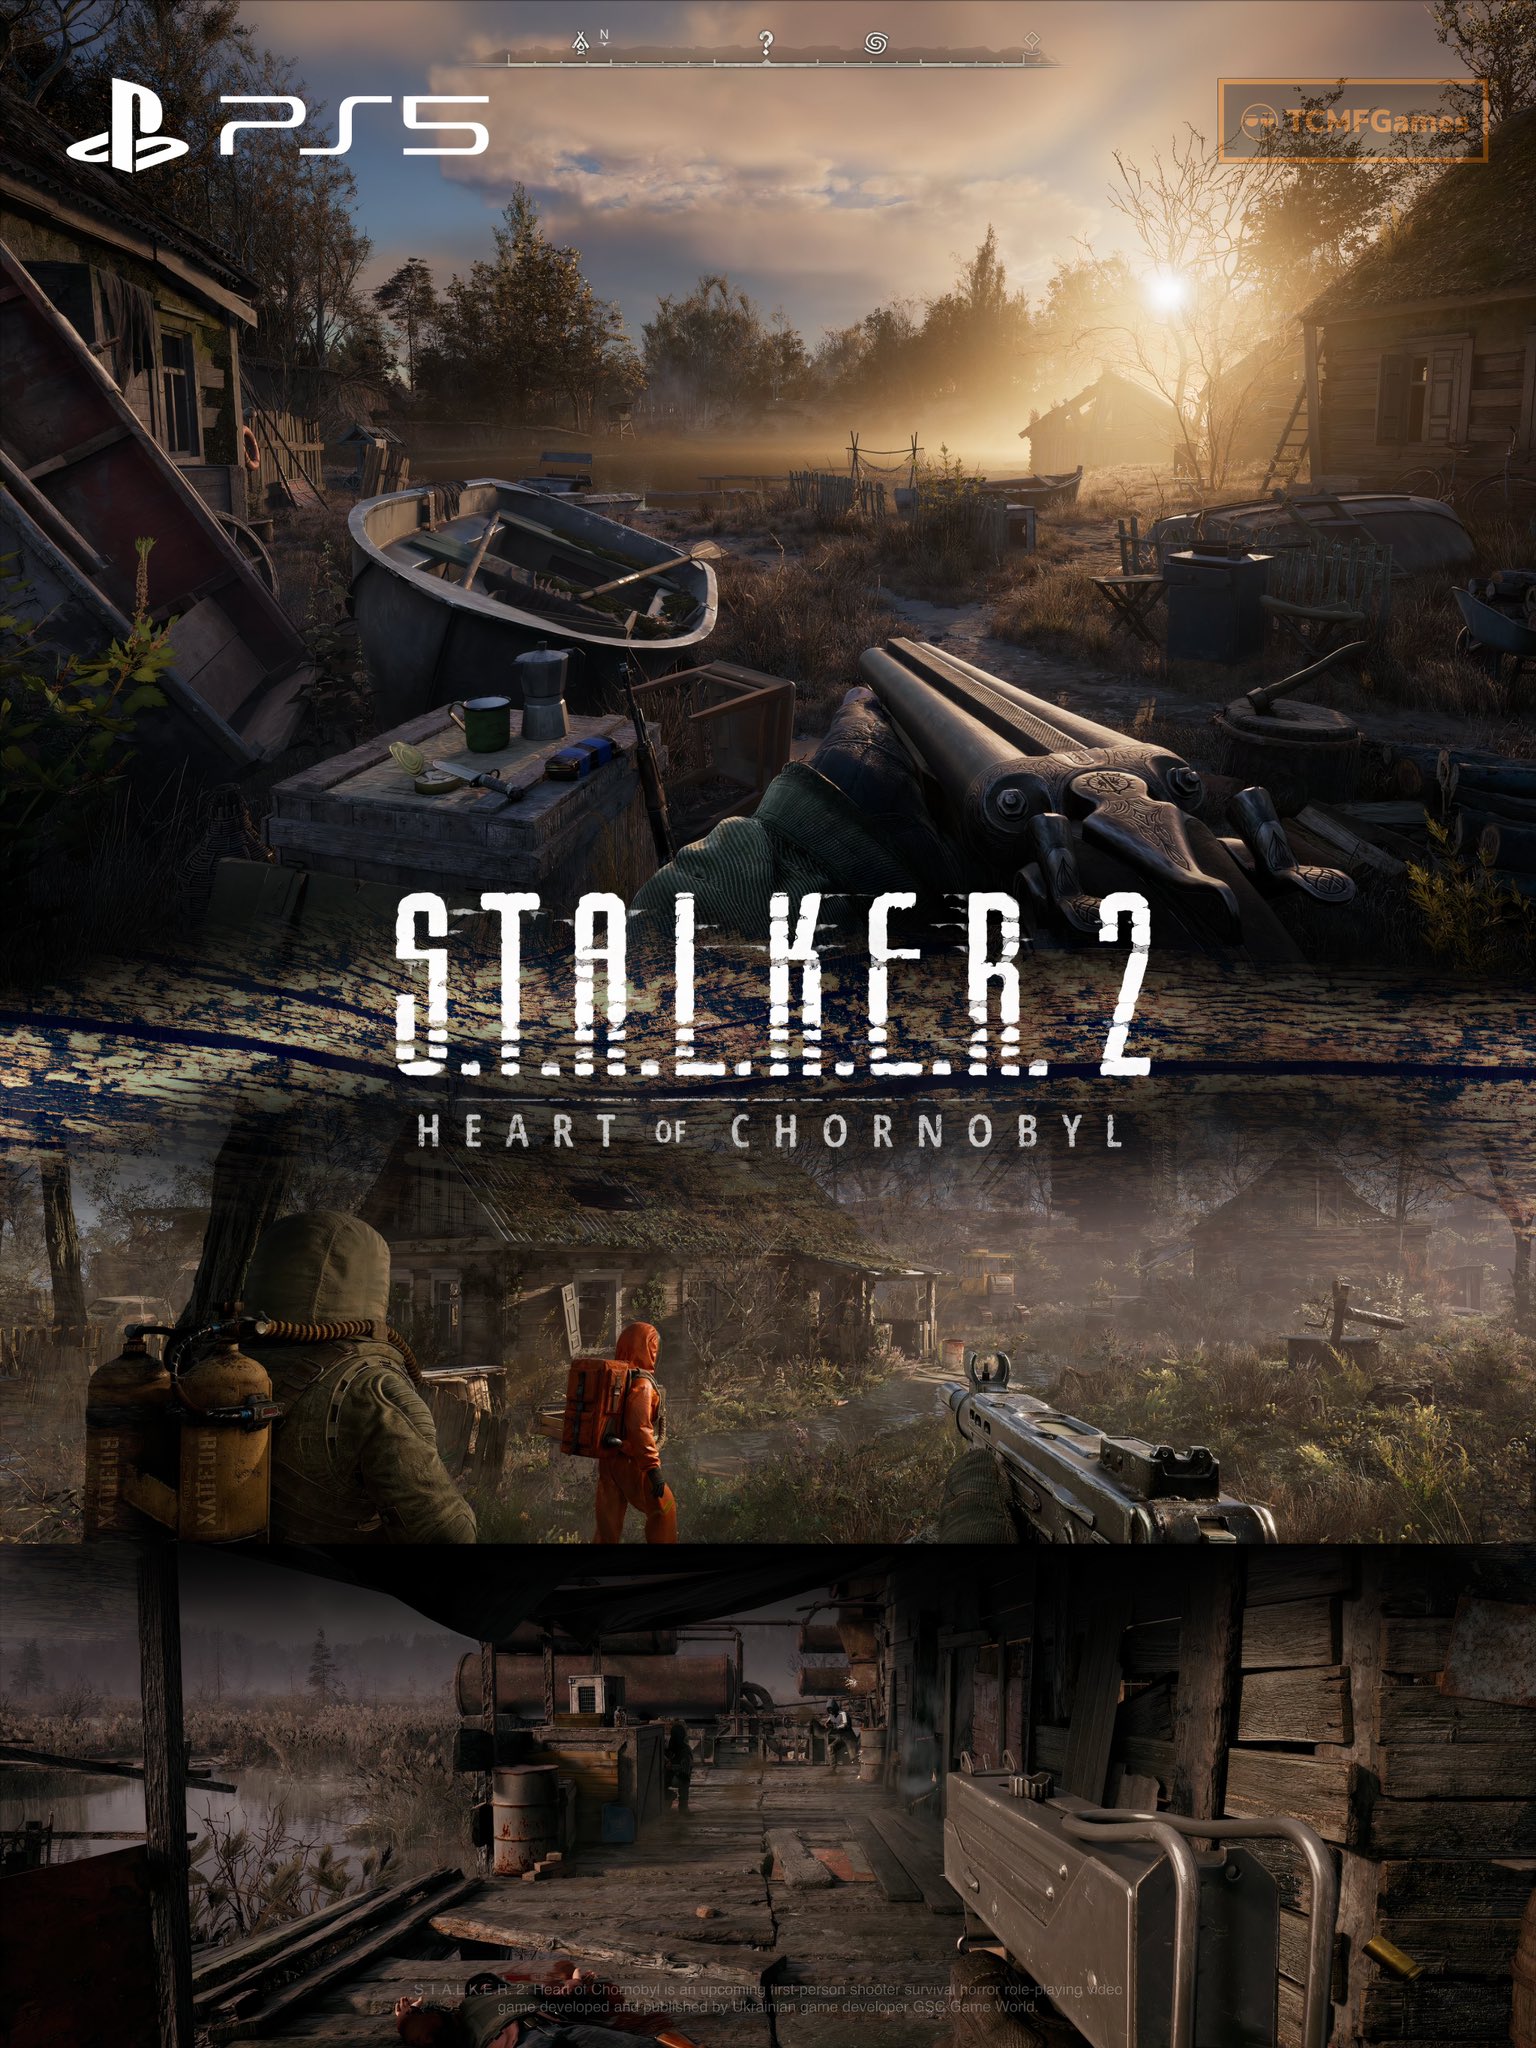 TCMFGames on X: Stalker 2 looks great, hope they do Dualsense